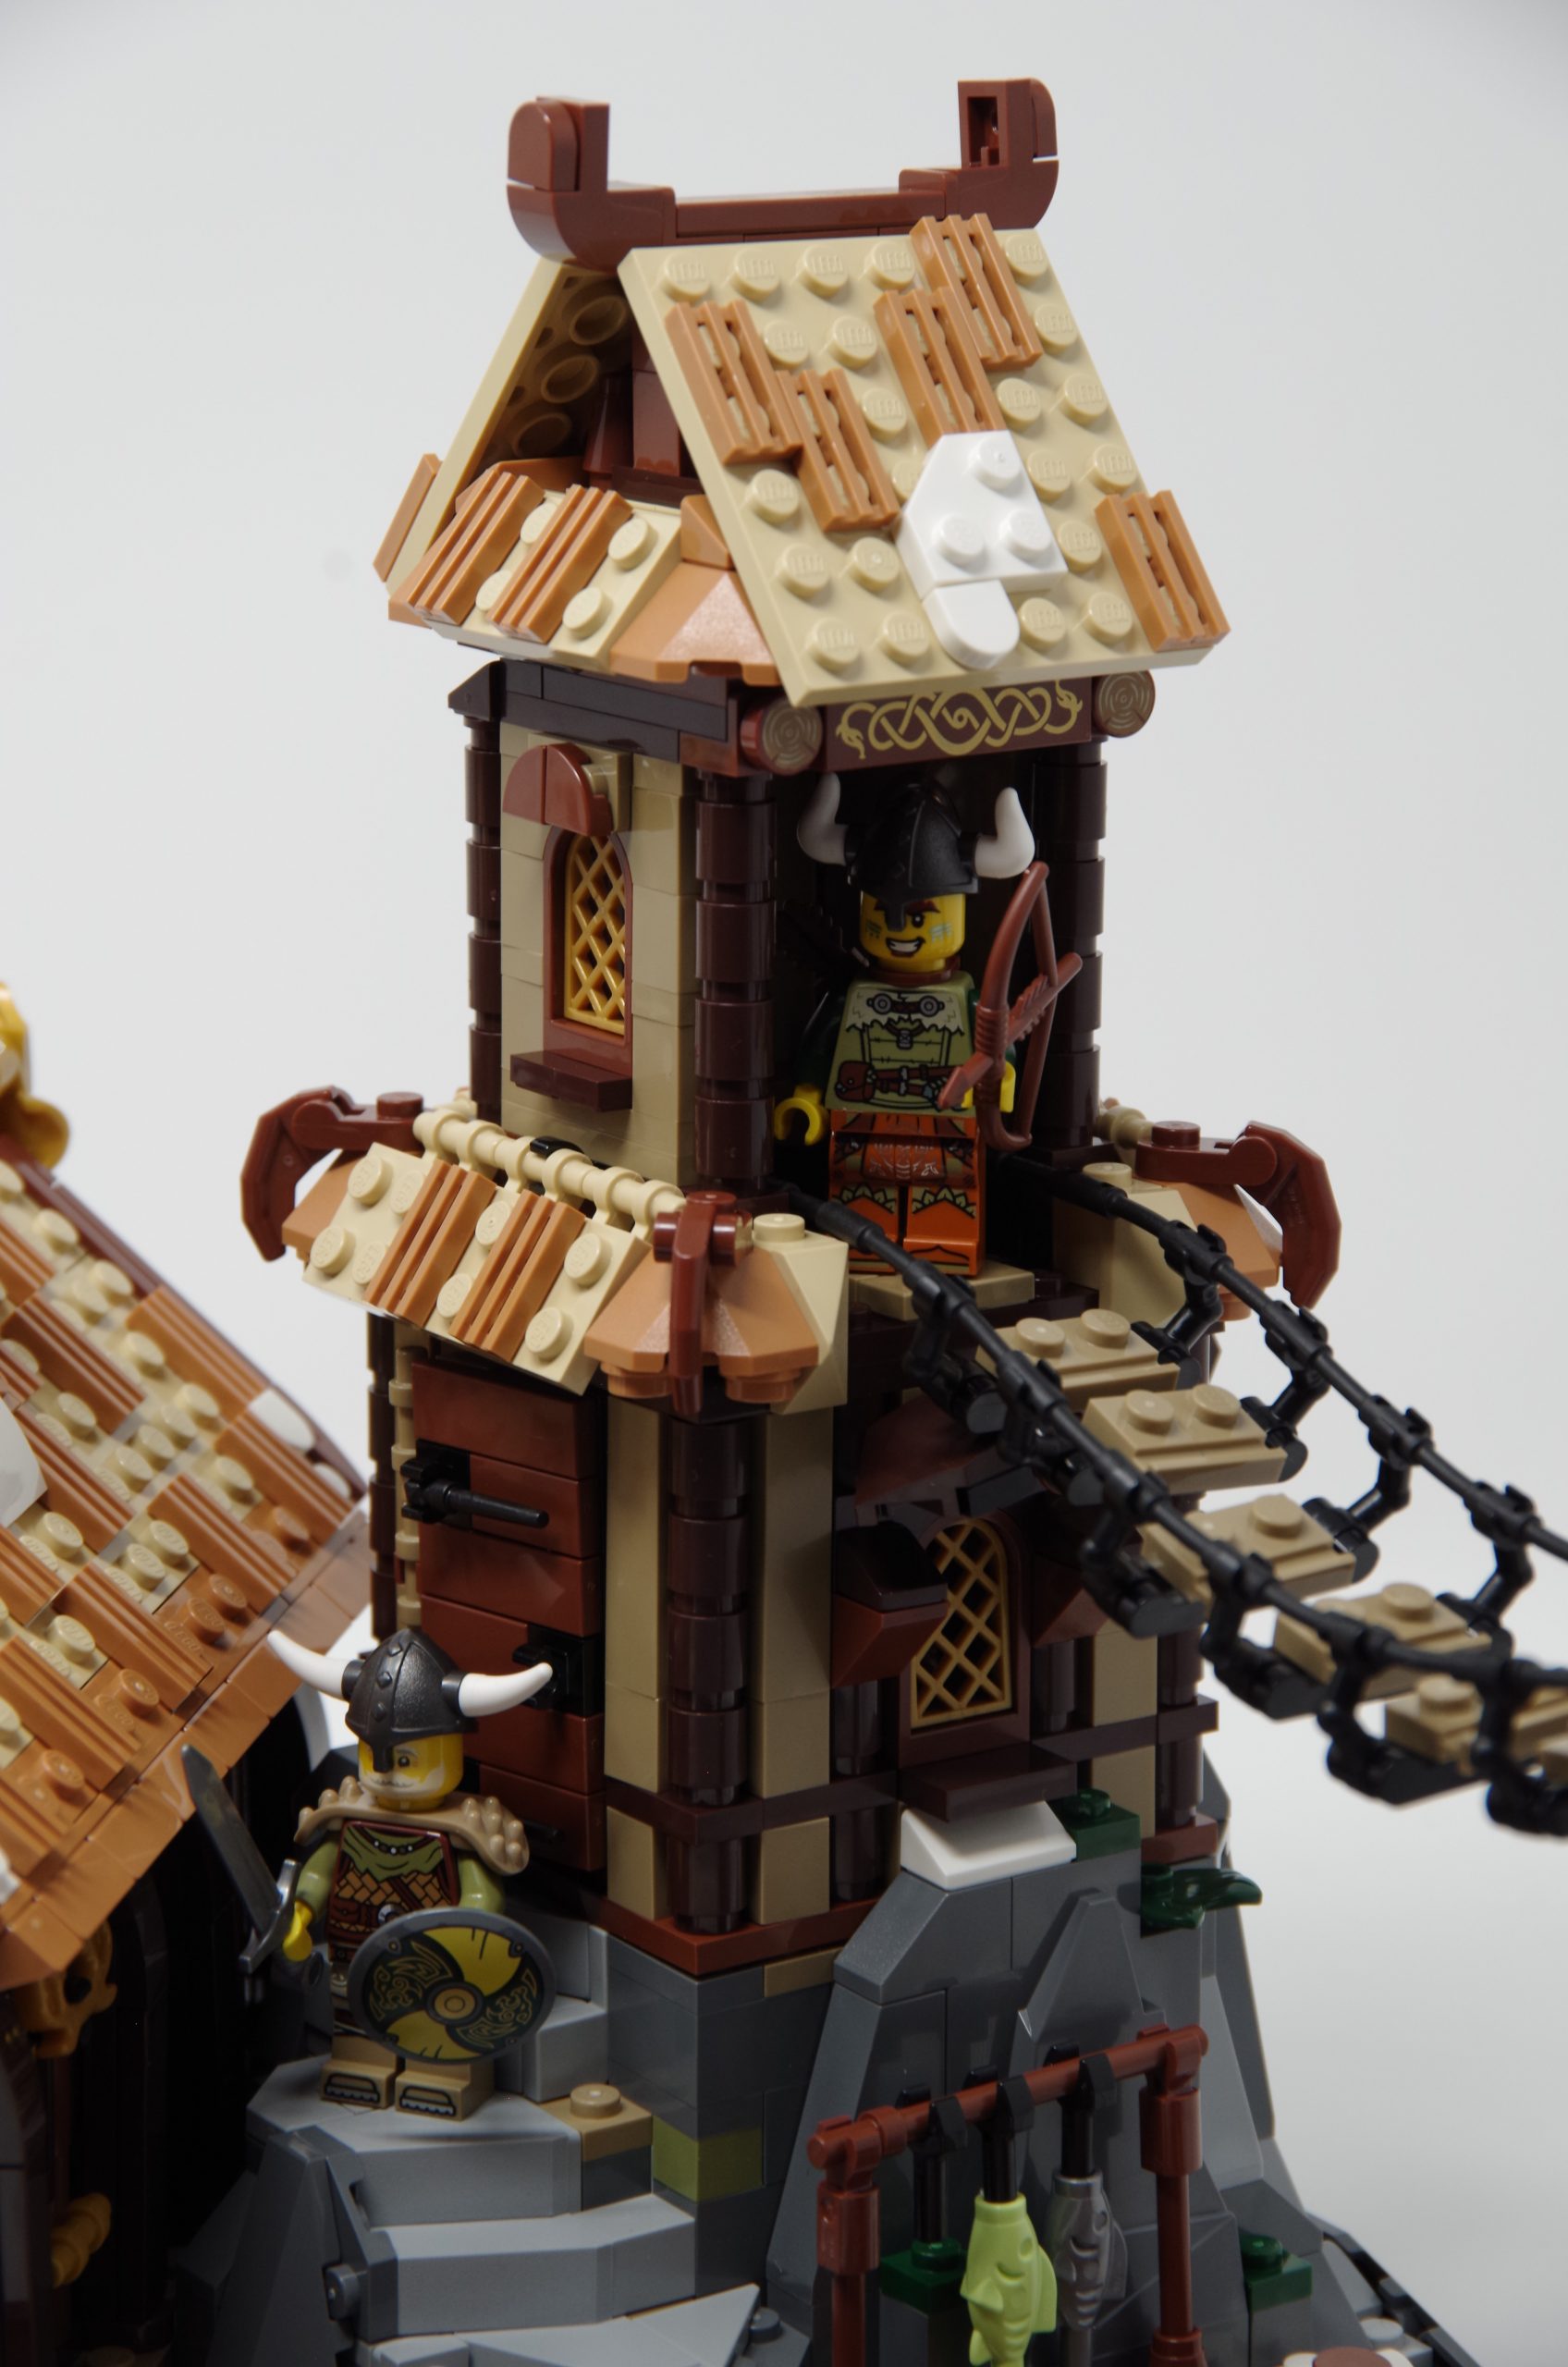 LEGO Ideas 21343 Viking Village - Hearty and sturdy, or a real